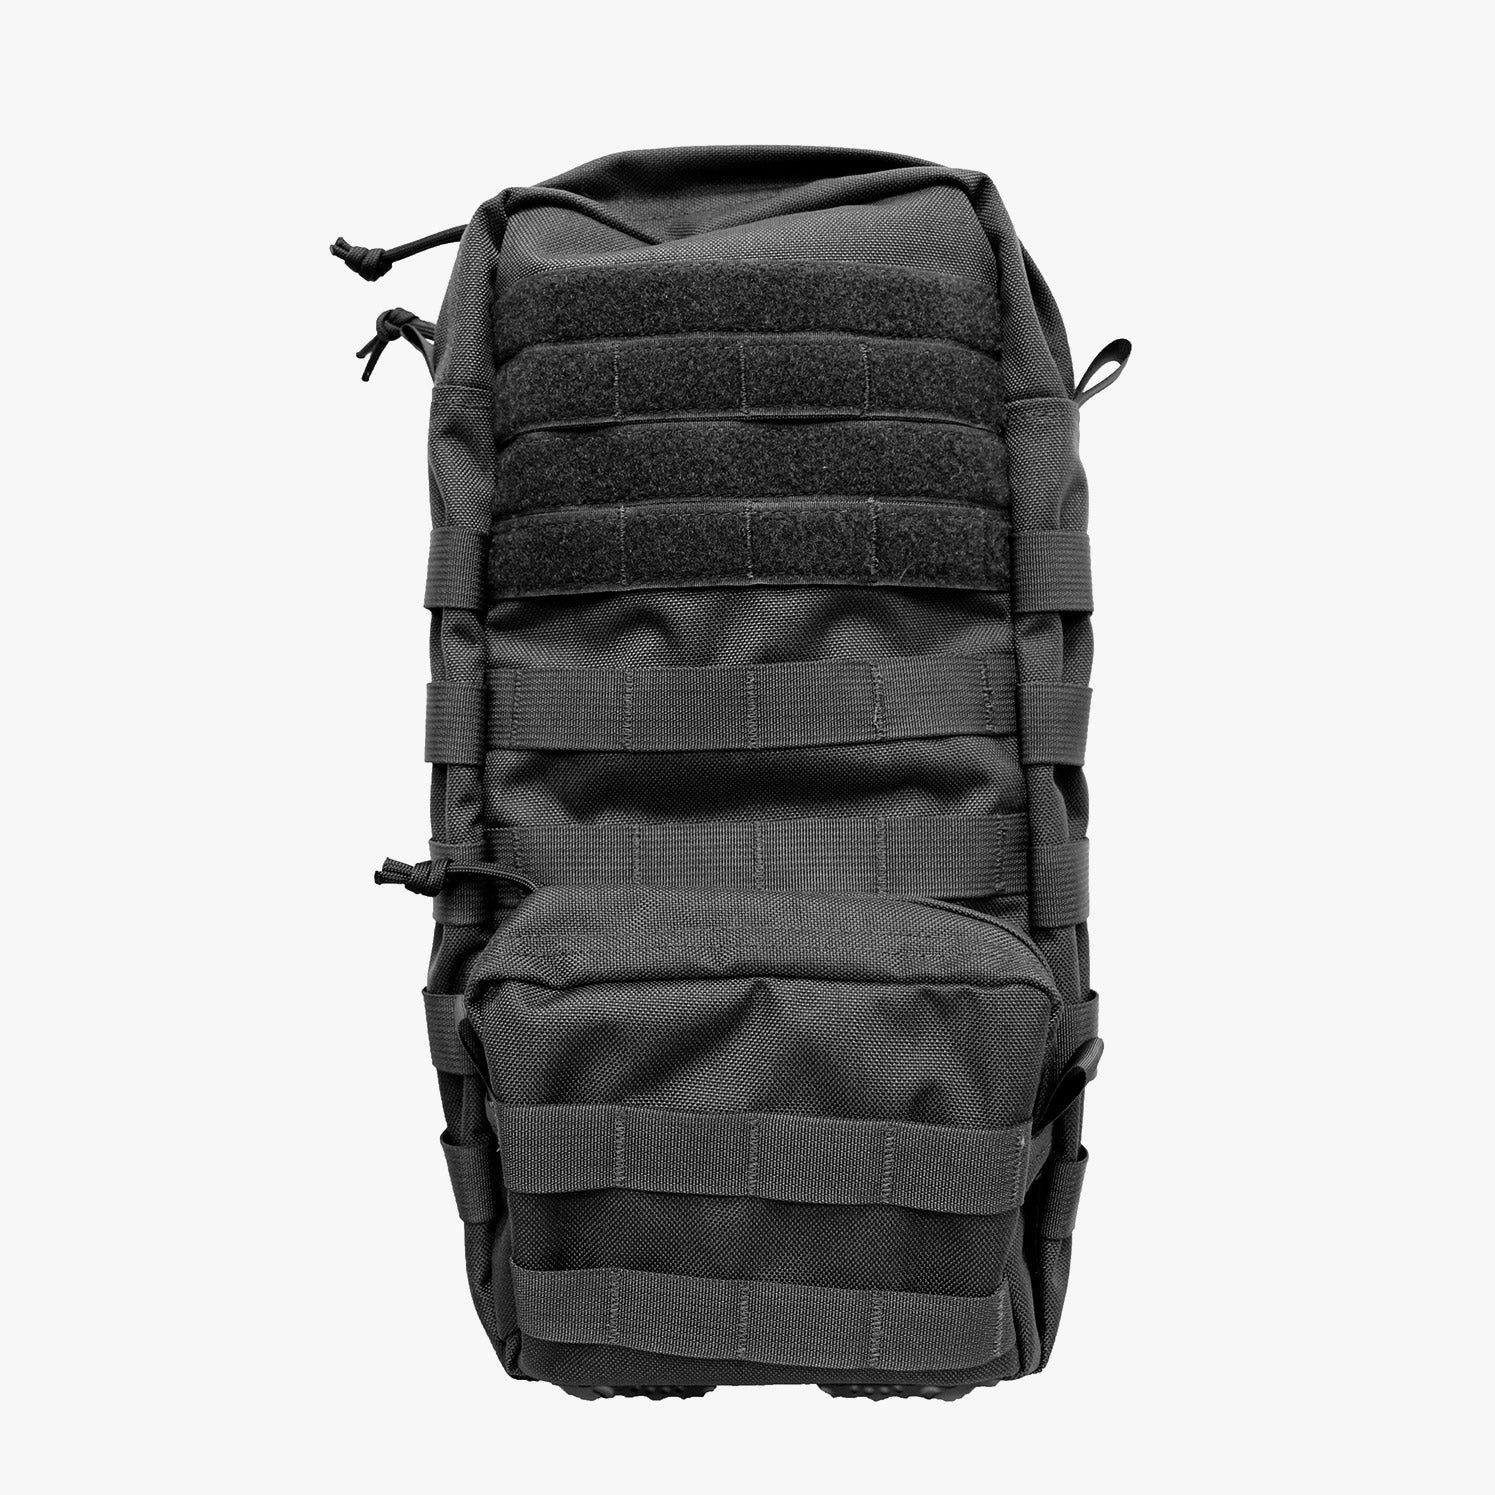 Hydration MOLLE Backpack 3L